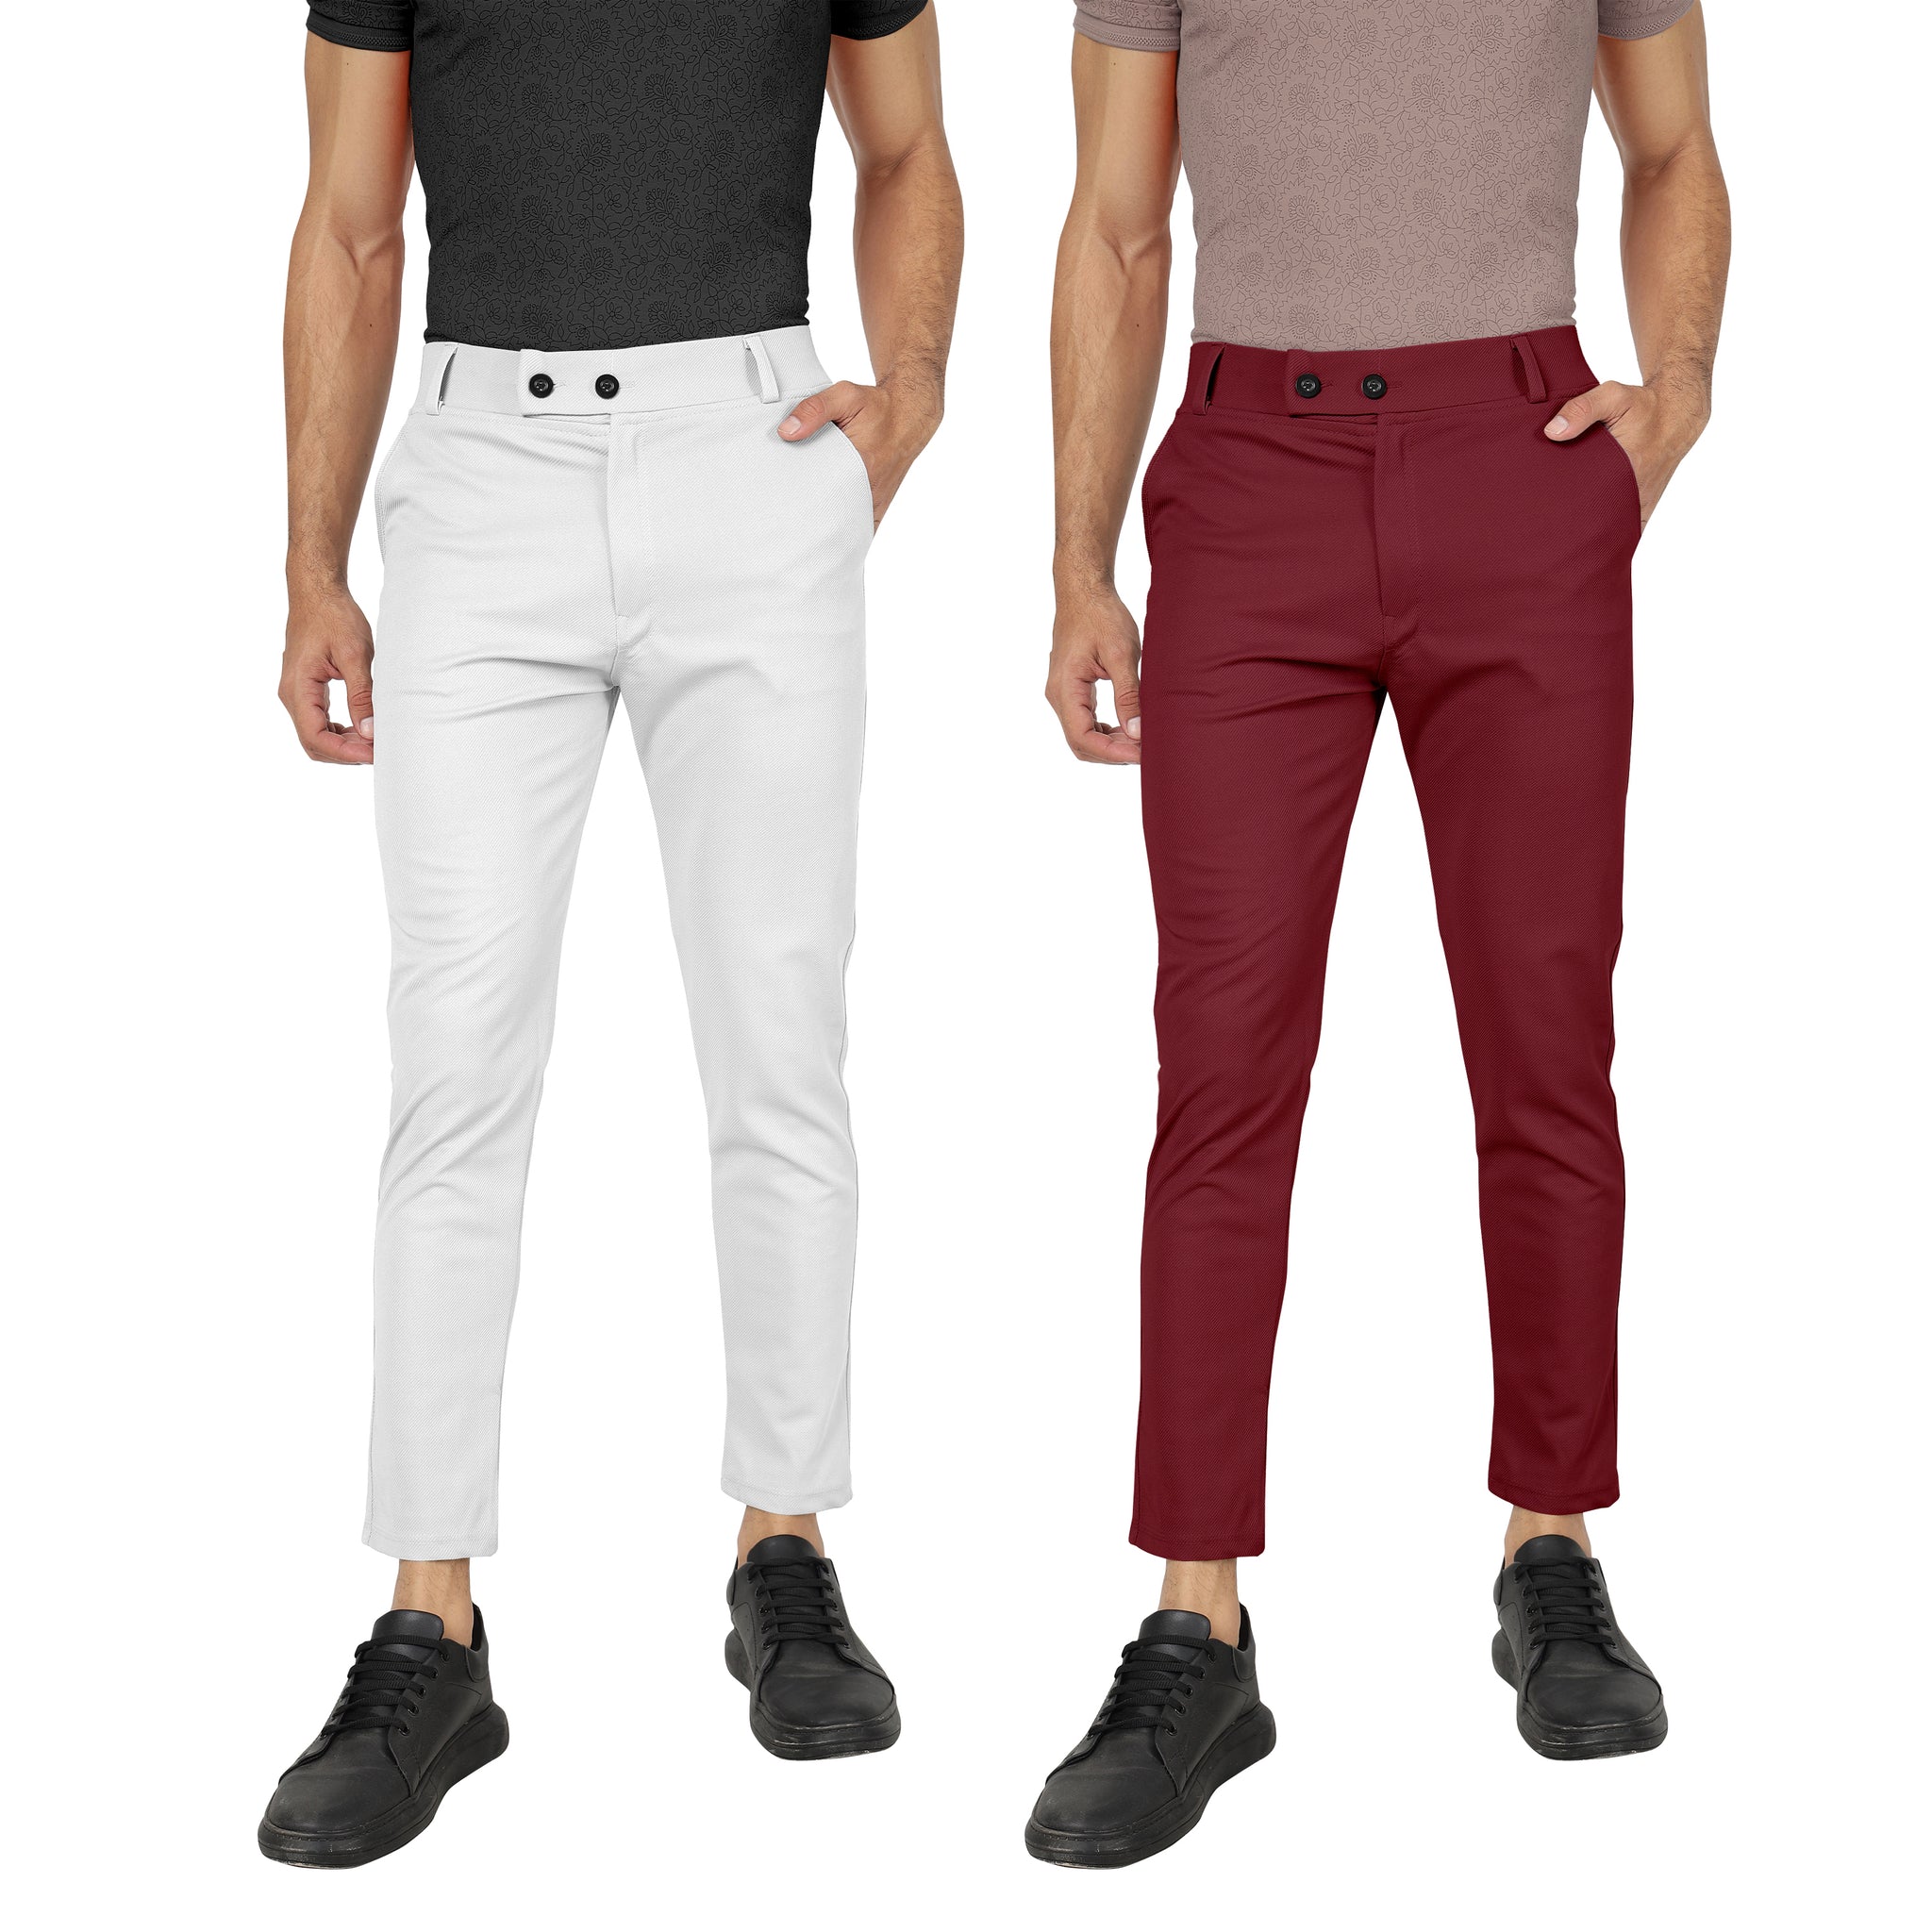 Combo Pack Of 2 White And Maroon Lycra Stretchable Formal Stylish Slim Fit Trousers.